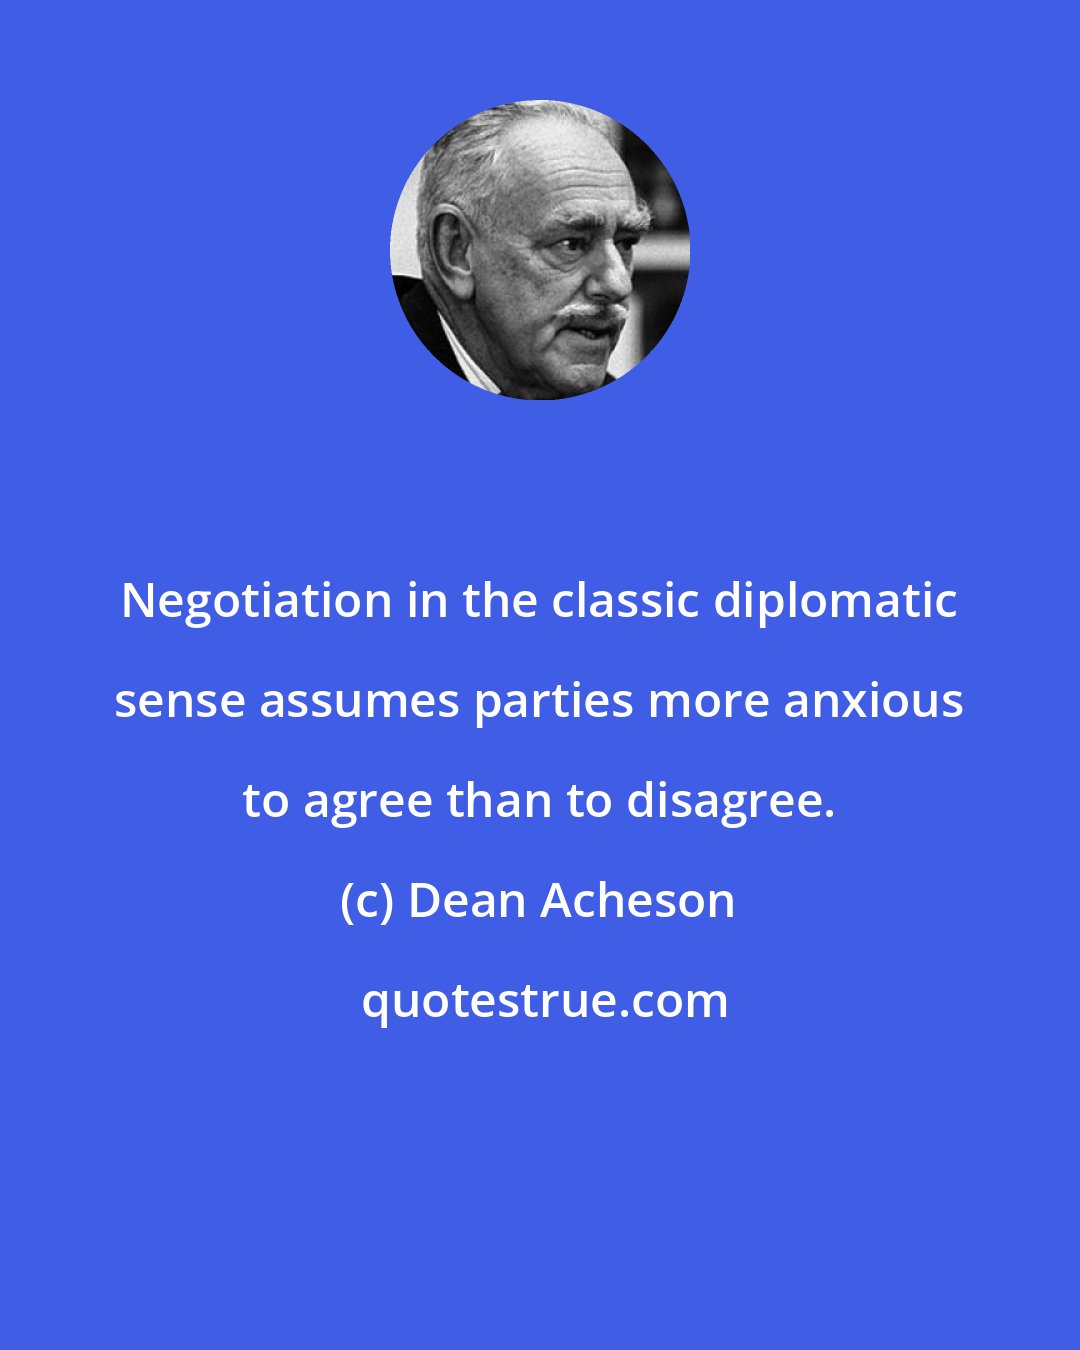 Dean Acheson: Negotiation in the classic diplomatic sense assumes parties more anxious to agree than to disagree.